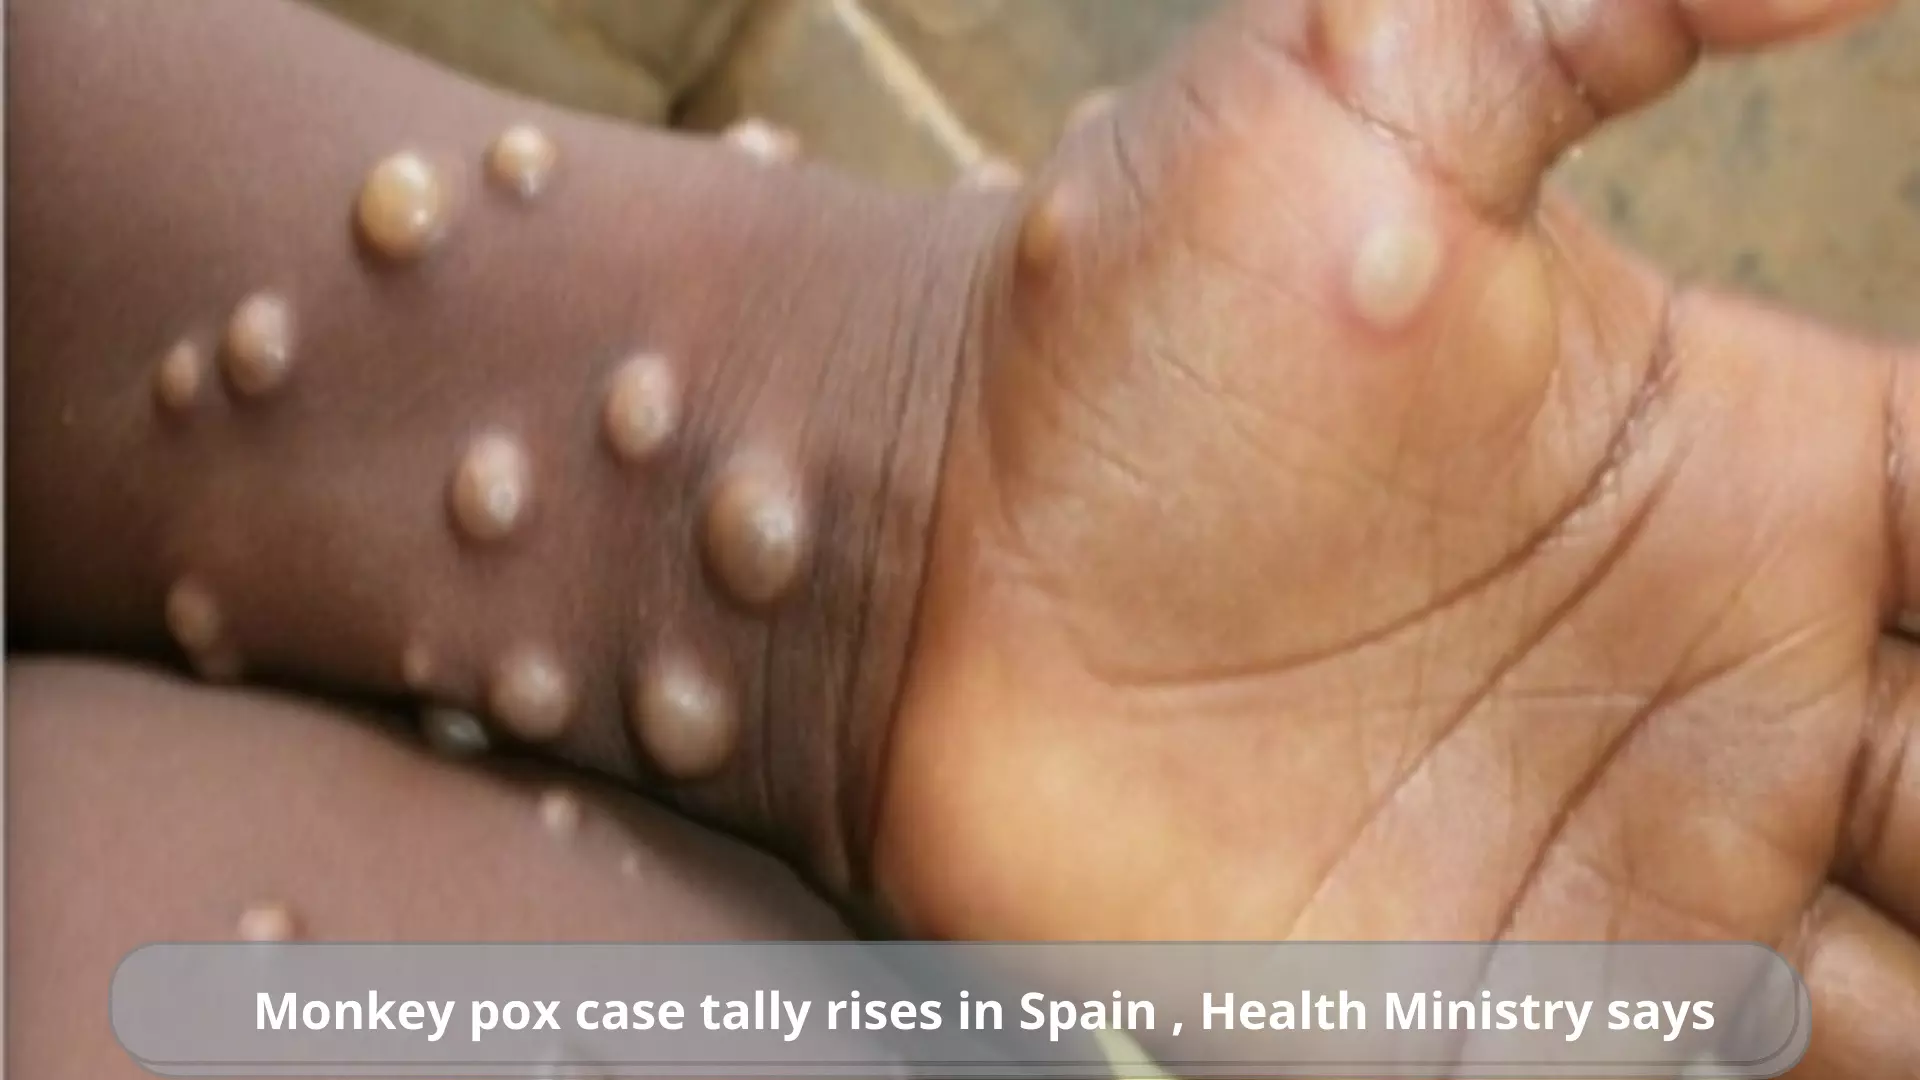 Monkey pox case tally rises in Spain: Health Ministry